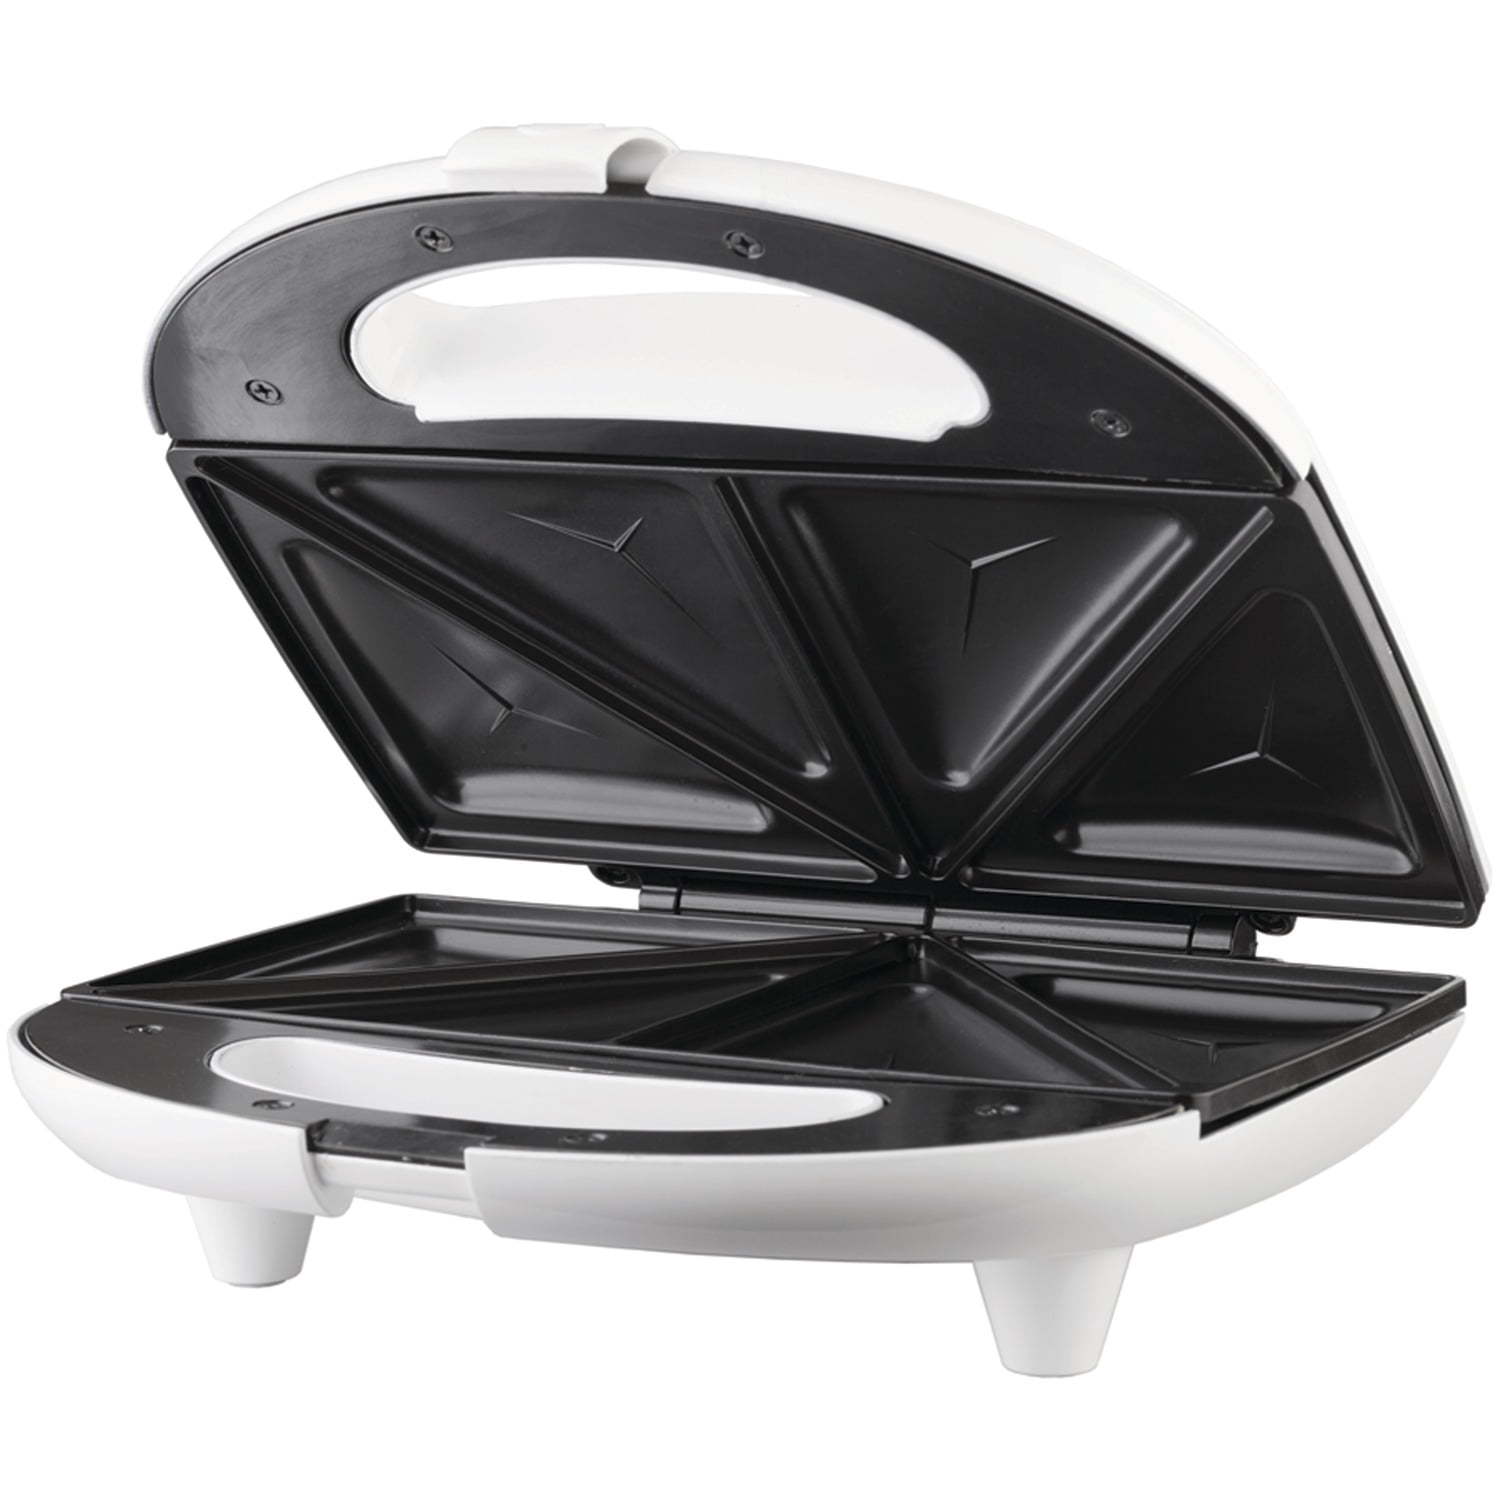 Black & Decker 220 volts Sandwich Maker with Grill and Waffle Maker  TS2090-B5 750 Watts 3 in 1 220V 240 Volts 50 hz 220-240 VOLTS NOT FOR USA